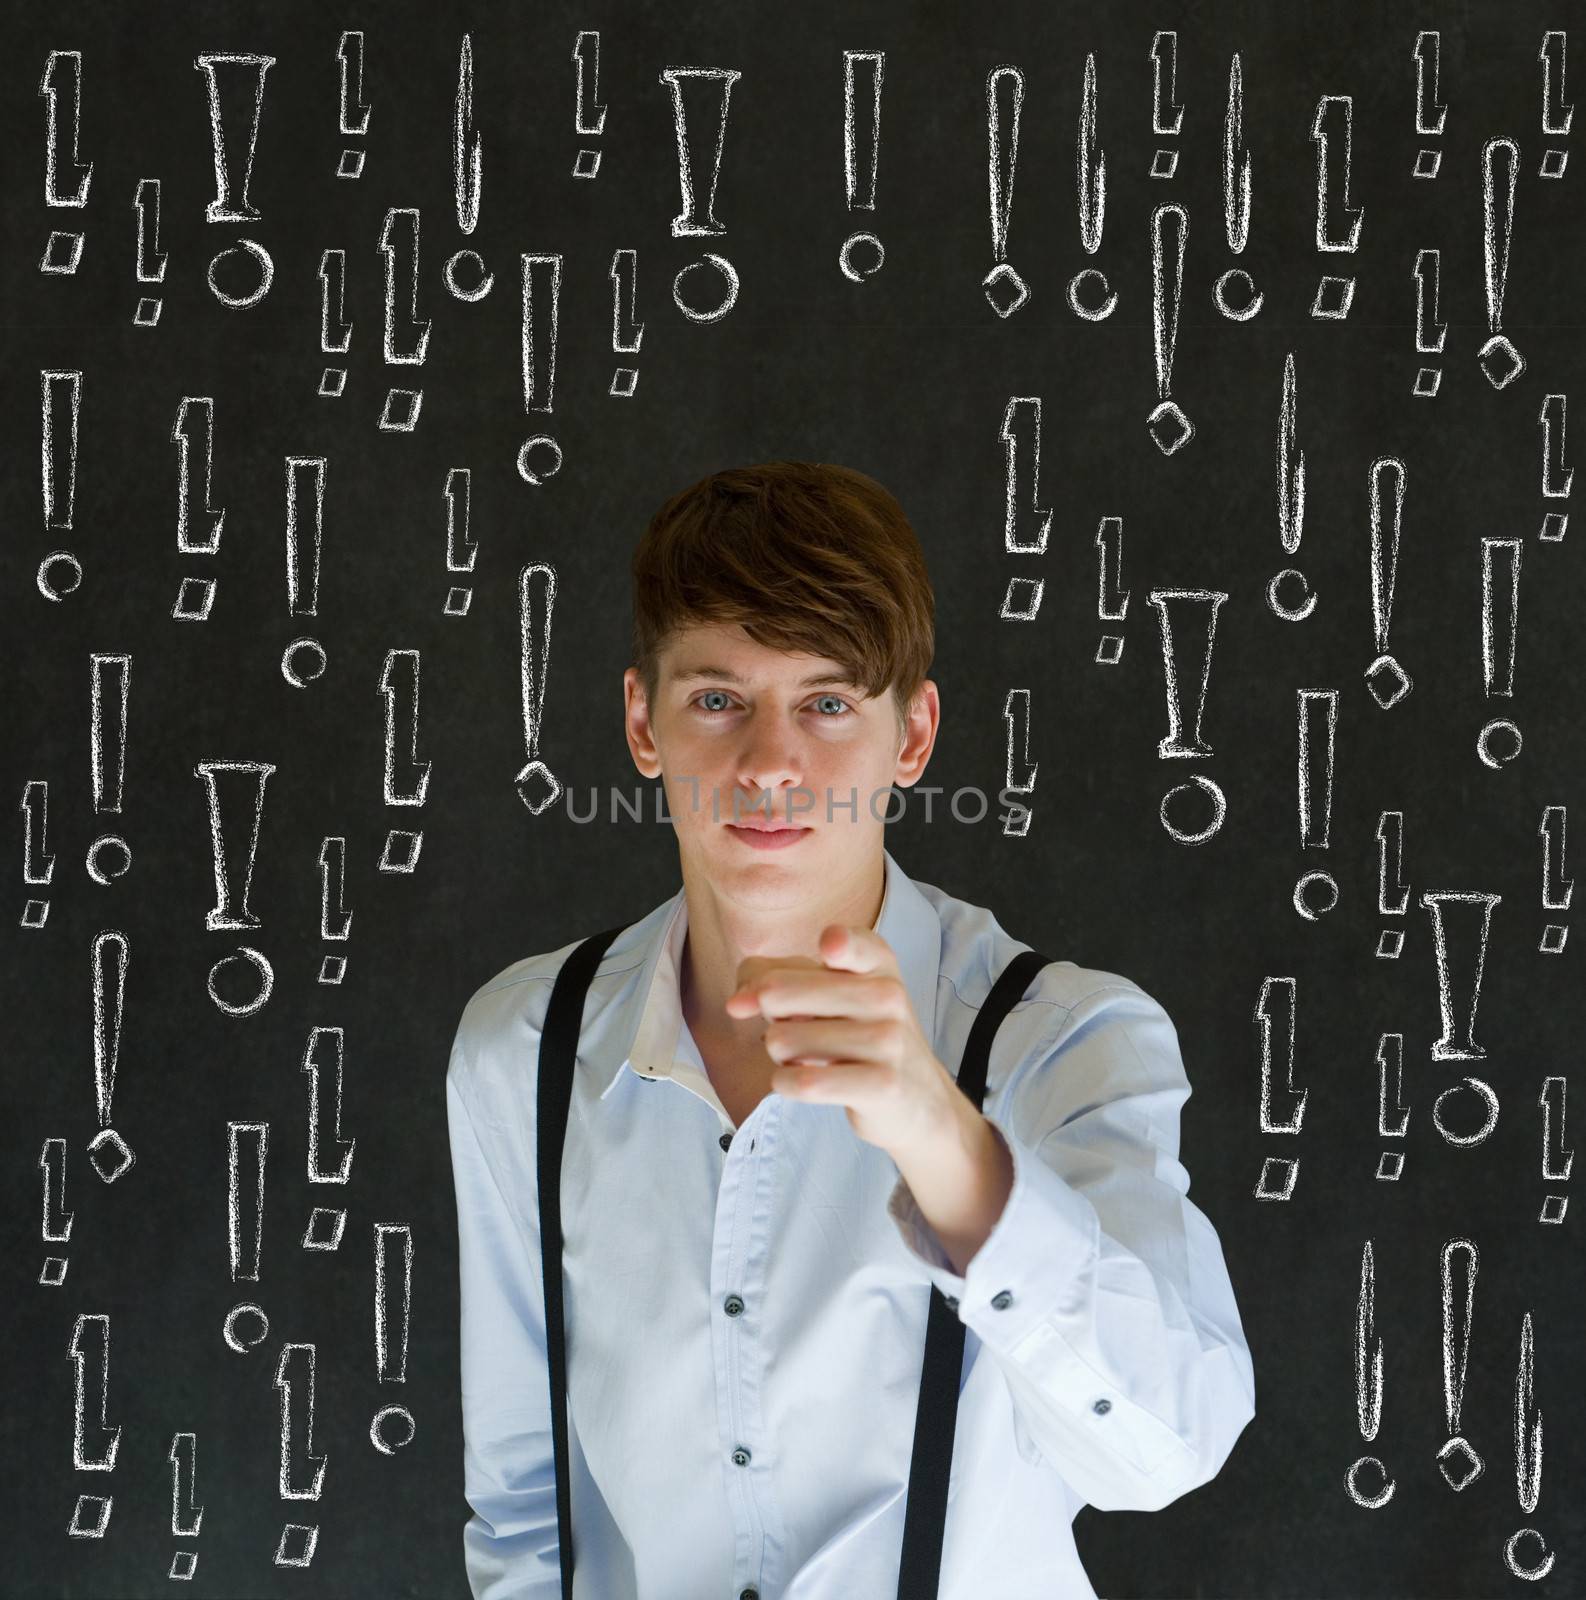 Thinking business man with chalk exclamation marks on blackboard background